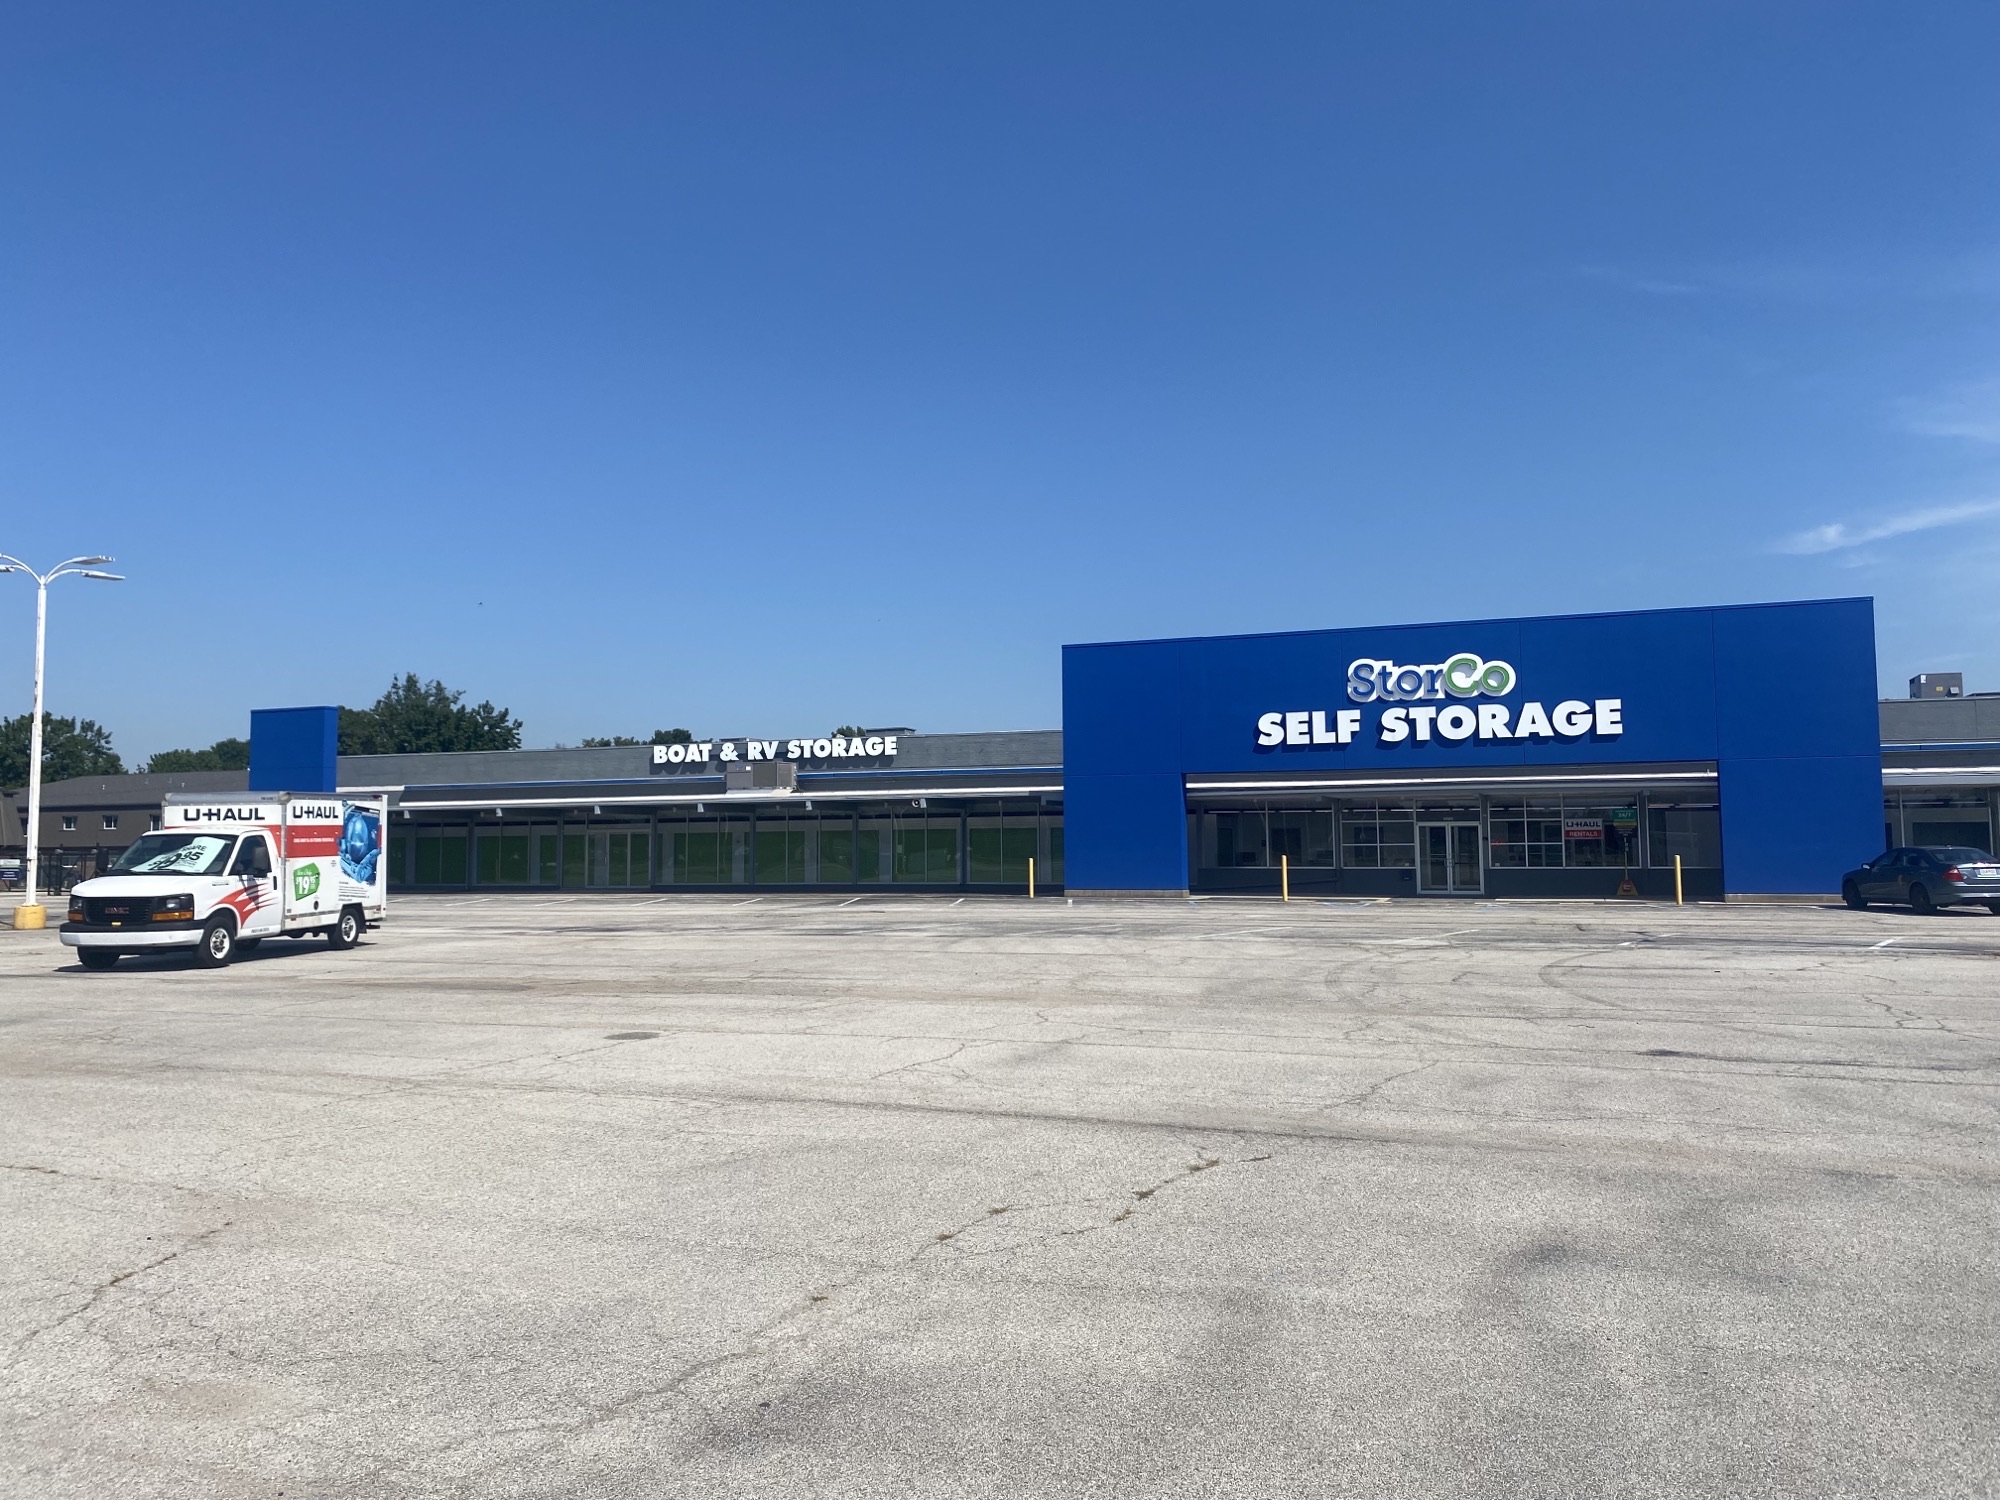 Storage Facility store front